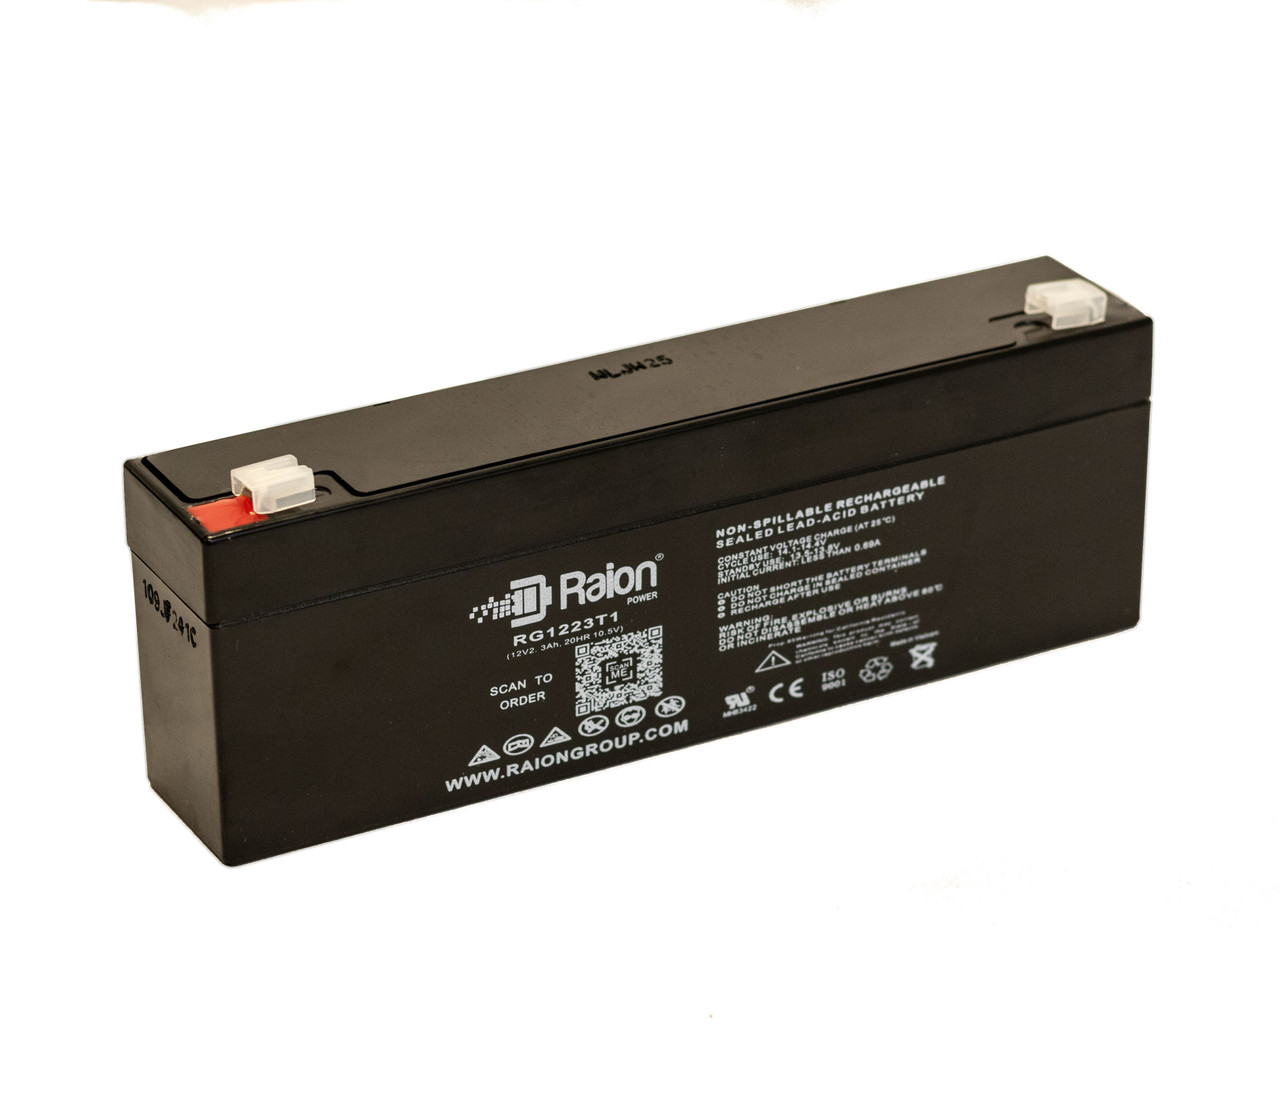 Raion Power RG1223T1 Replacement Battery for RS Pro 537-5450